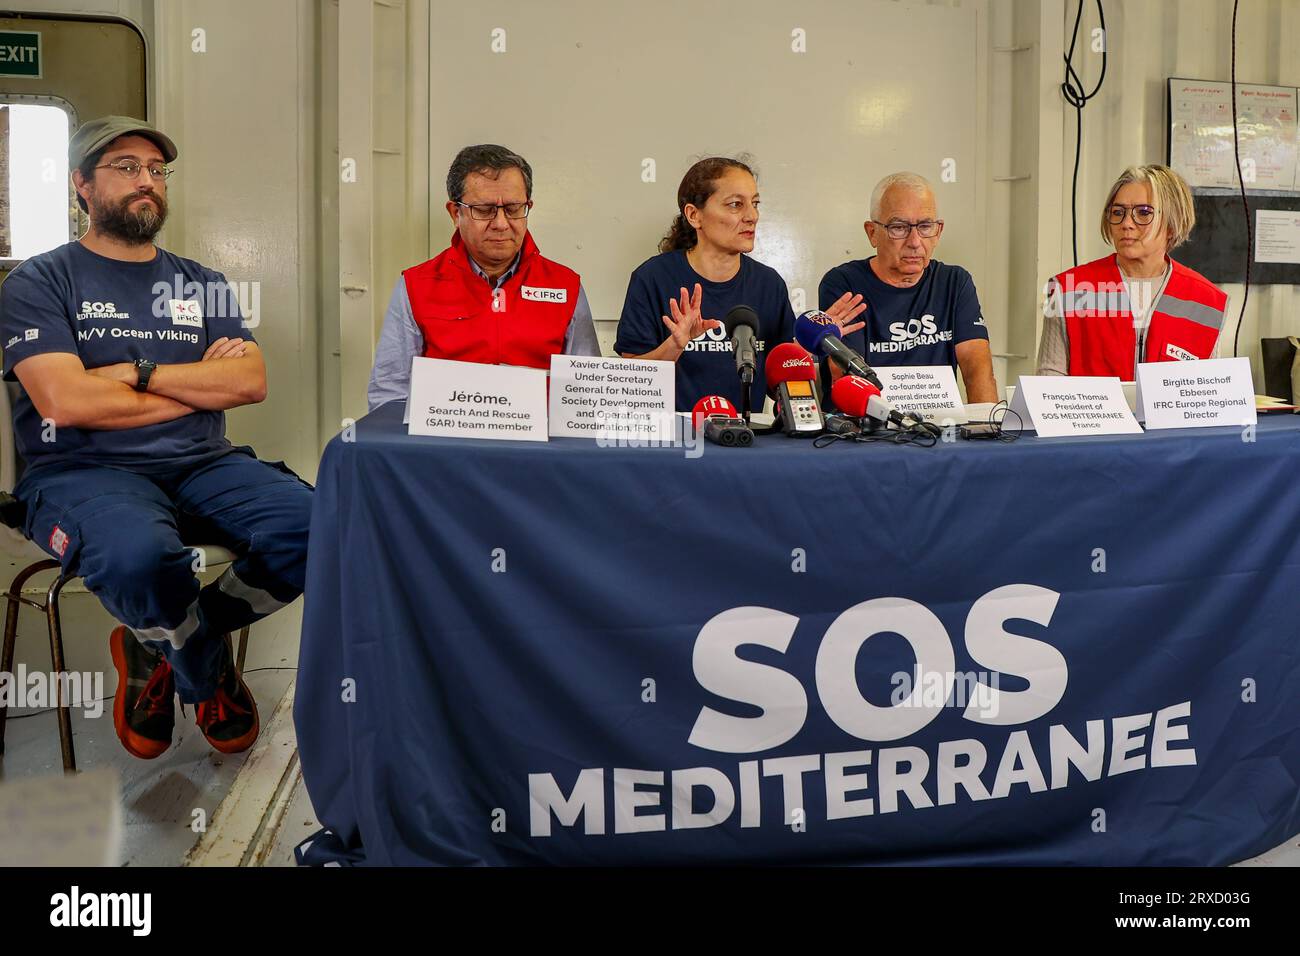 From L to R : Jérome search and rescue team member, Xavier CASTELLANOS, Sophie BEAU, François THOMAS, Brigitte BISCHOFF EBBESEN, answer questions from journalists during the press conference aboard the humanitarian ship Viking Ocean The NGO SOS Méditerranée and its partner the IFRC (International Federation of the Red Cross) have launched an appeal for solidarity from European states who bear witness to the deterioration of people in distress in the central Mediterranean. Stock Photo